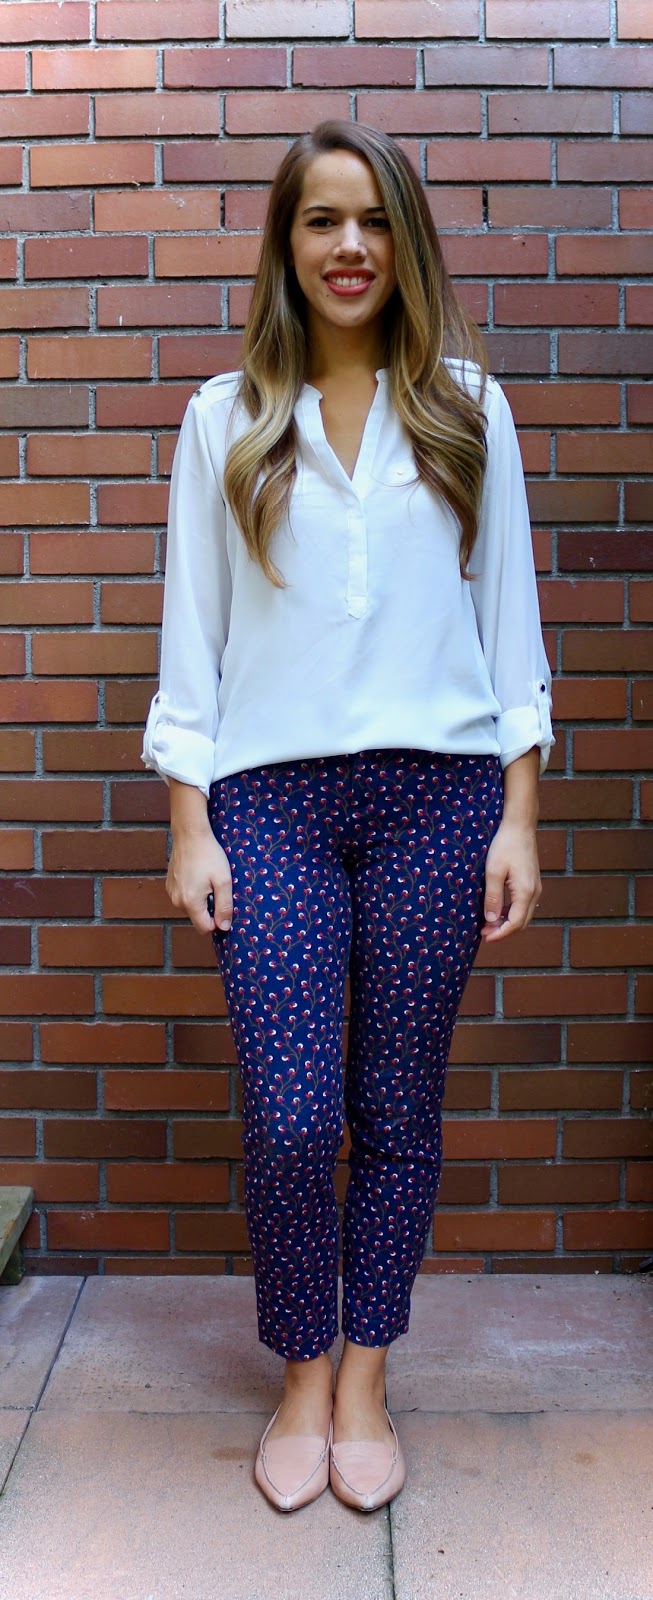 Jules in Flats - Patterned Pants with White Blouse (Business Casual Fall Workwear on a Budget) 